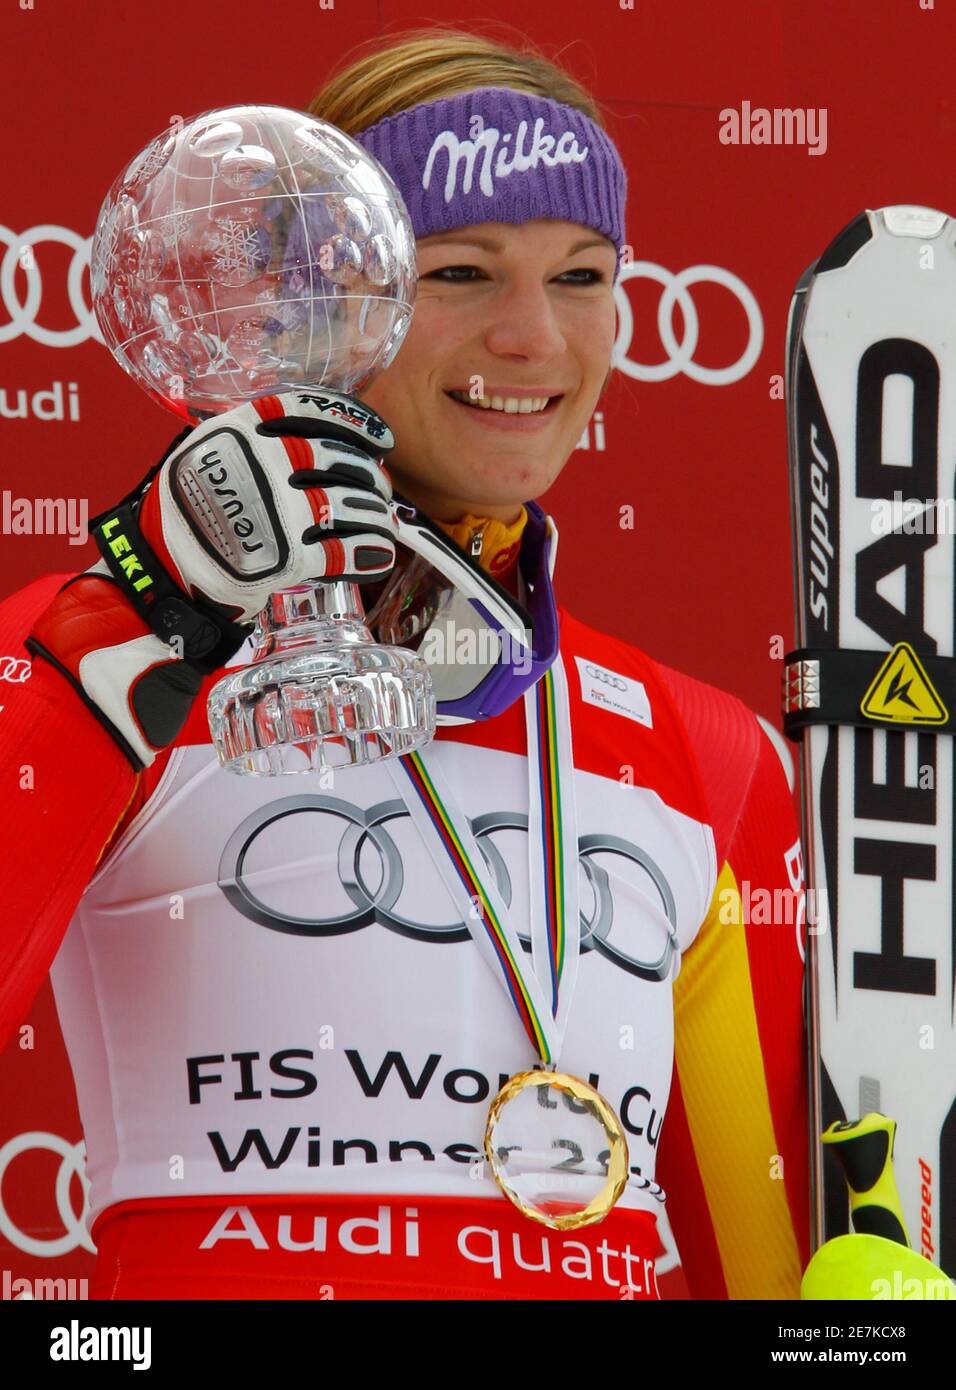 Maria Riesch of Germany poses with the women's Slalom Alpine Skiing World Cup trophy at the season's finals in Garmisch-Partenkirchen March 13, 2010.    REUTERS/Wolfgang Rattay   (GERMANY SPORT SKIING) Stock Photo